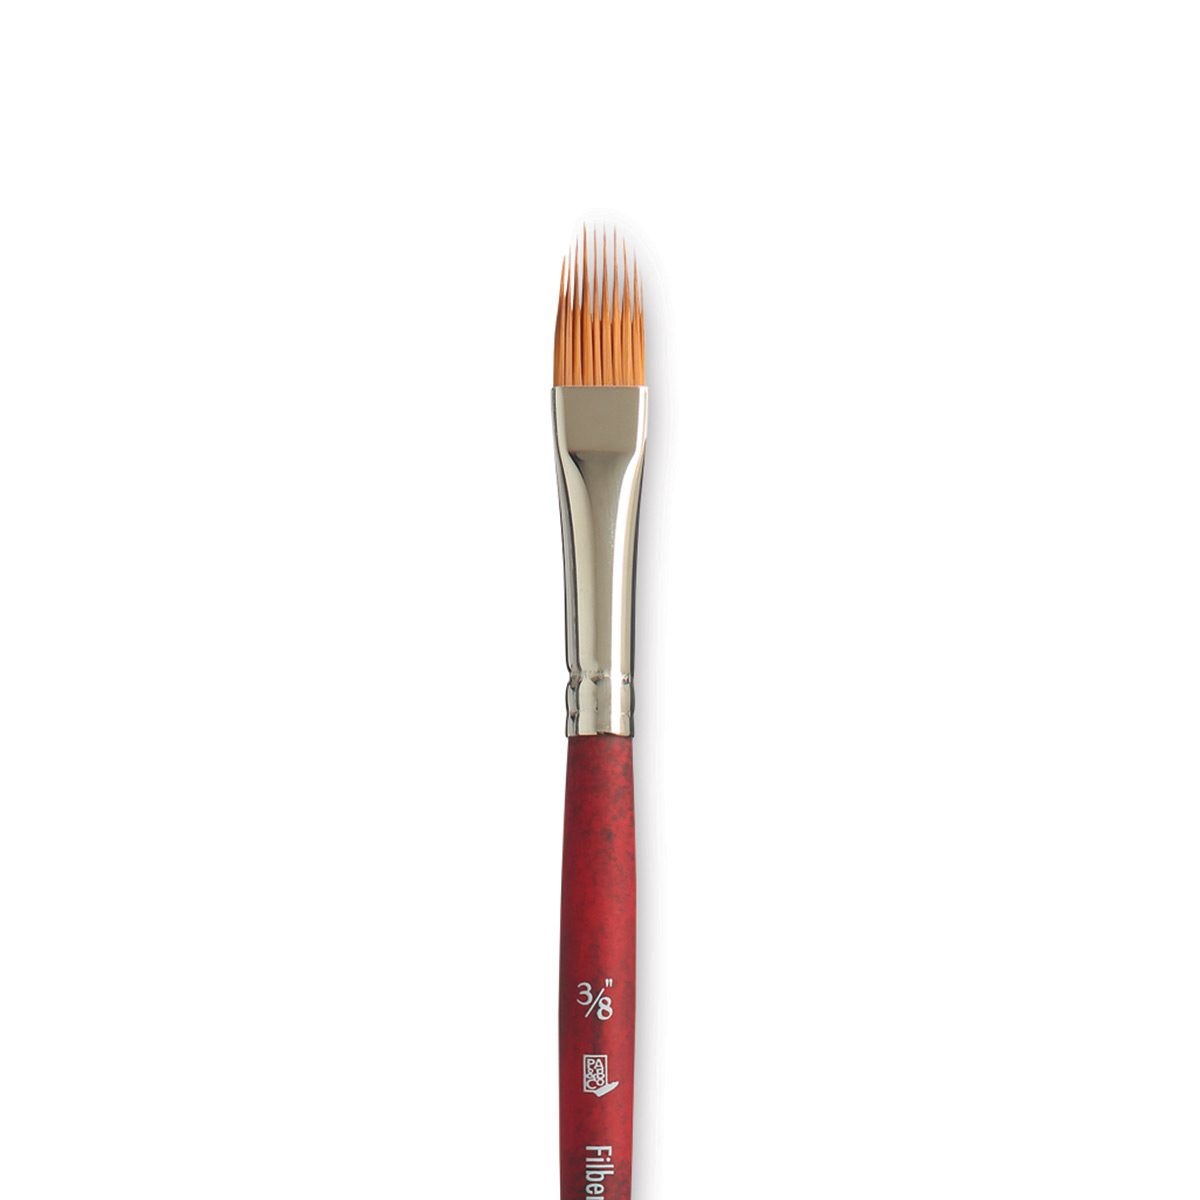 Velvetouch Fan Series by Princeton Brush - Brushes and More